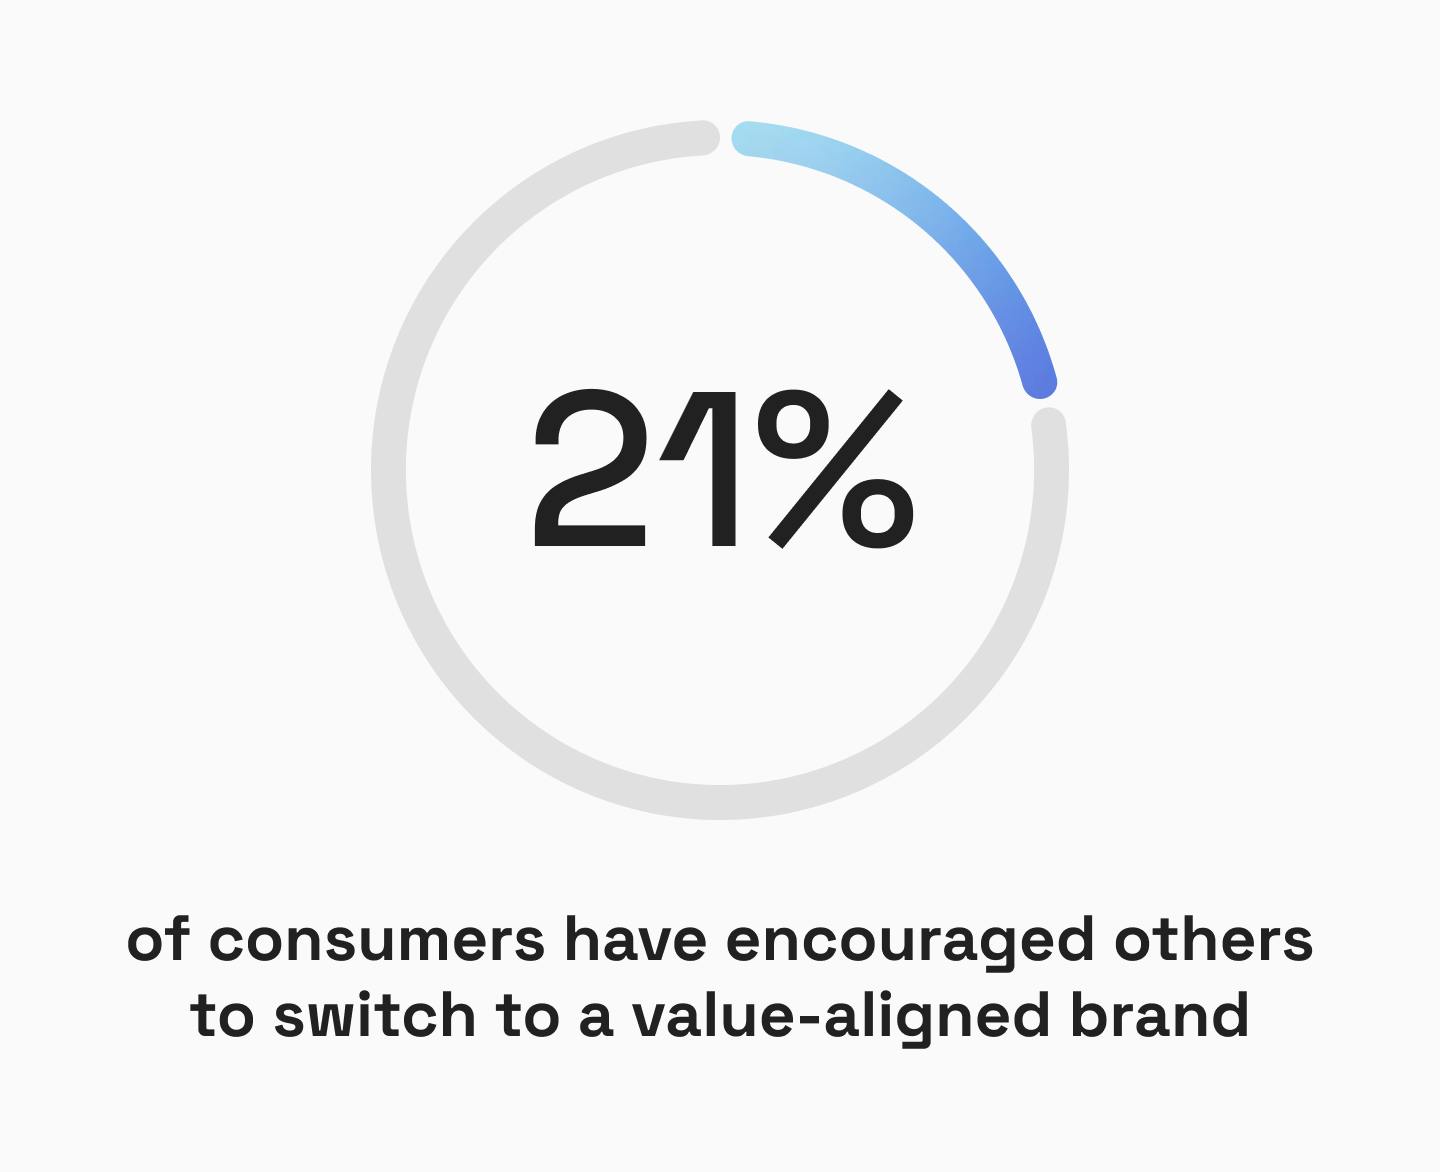 21% of consumers have encouraged others to switch to a value-aligned brand